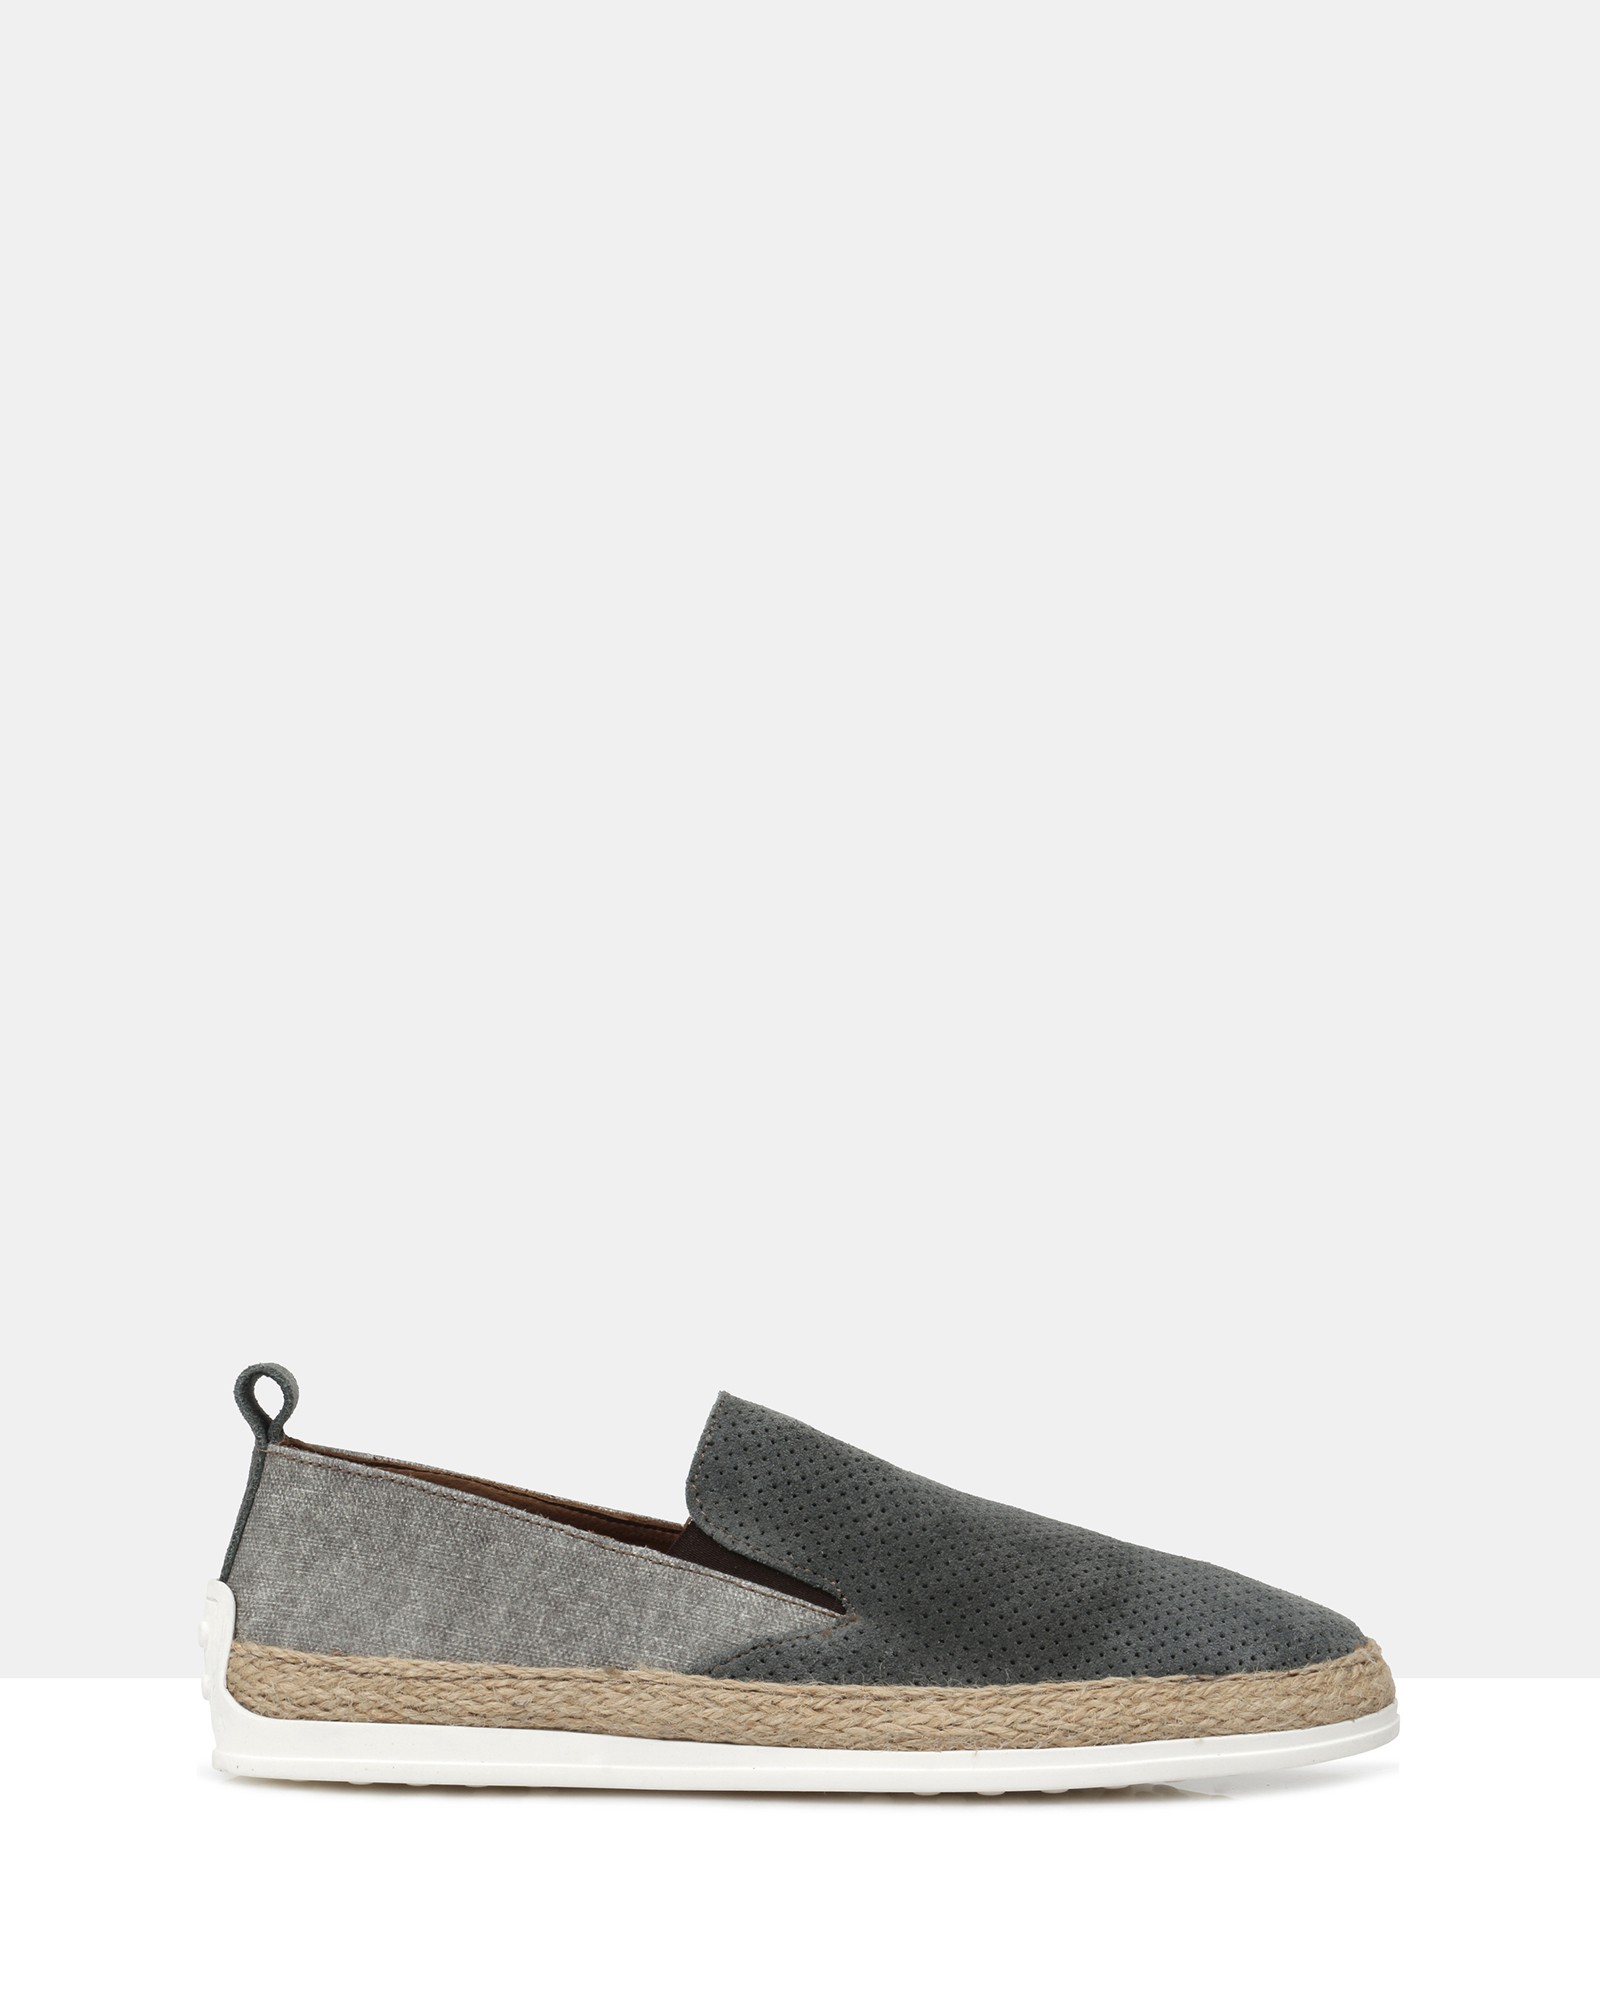 Sand Slip Ons Olive by Brando | ShoeSales